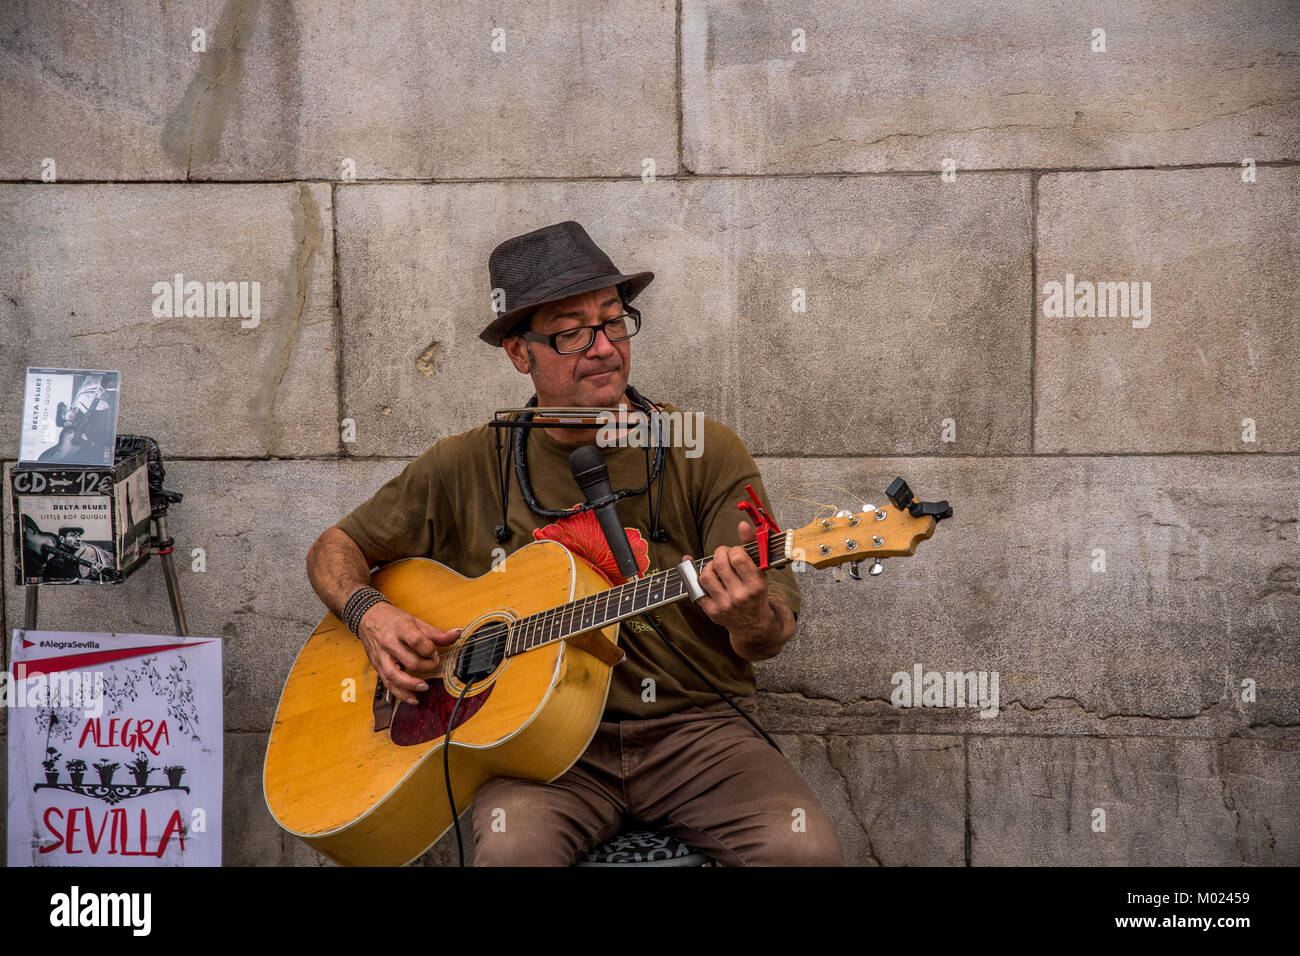 SEVILLE, ANDALUSIA / SPAIN - OCTOBER 13 2017: STREET GUITAR PLAYER Stock Photo